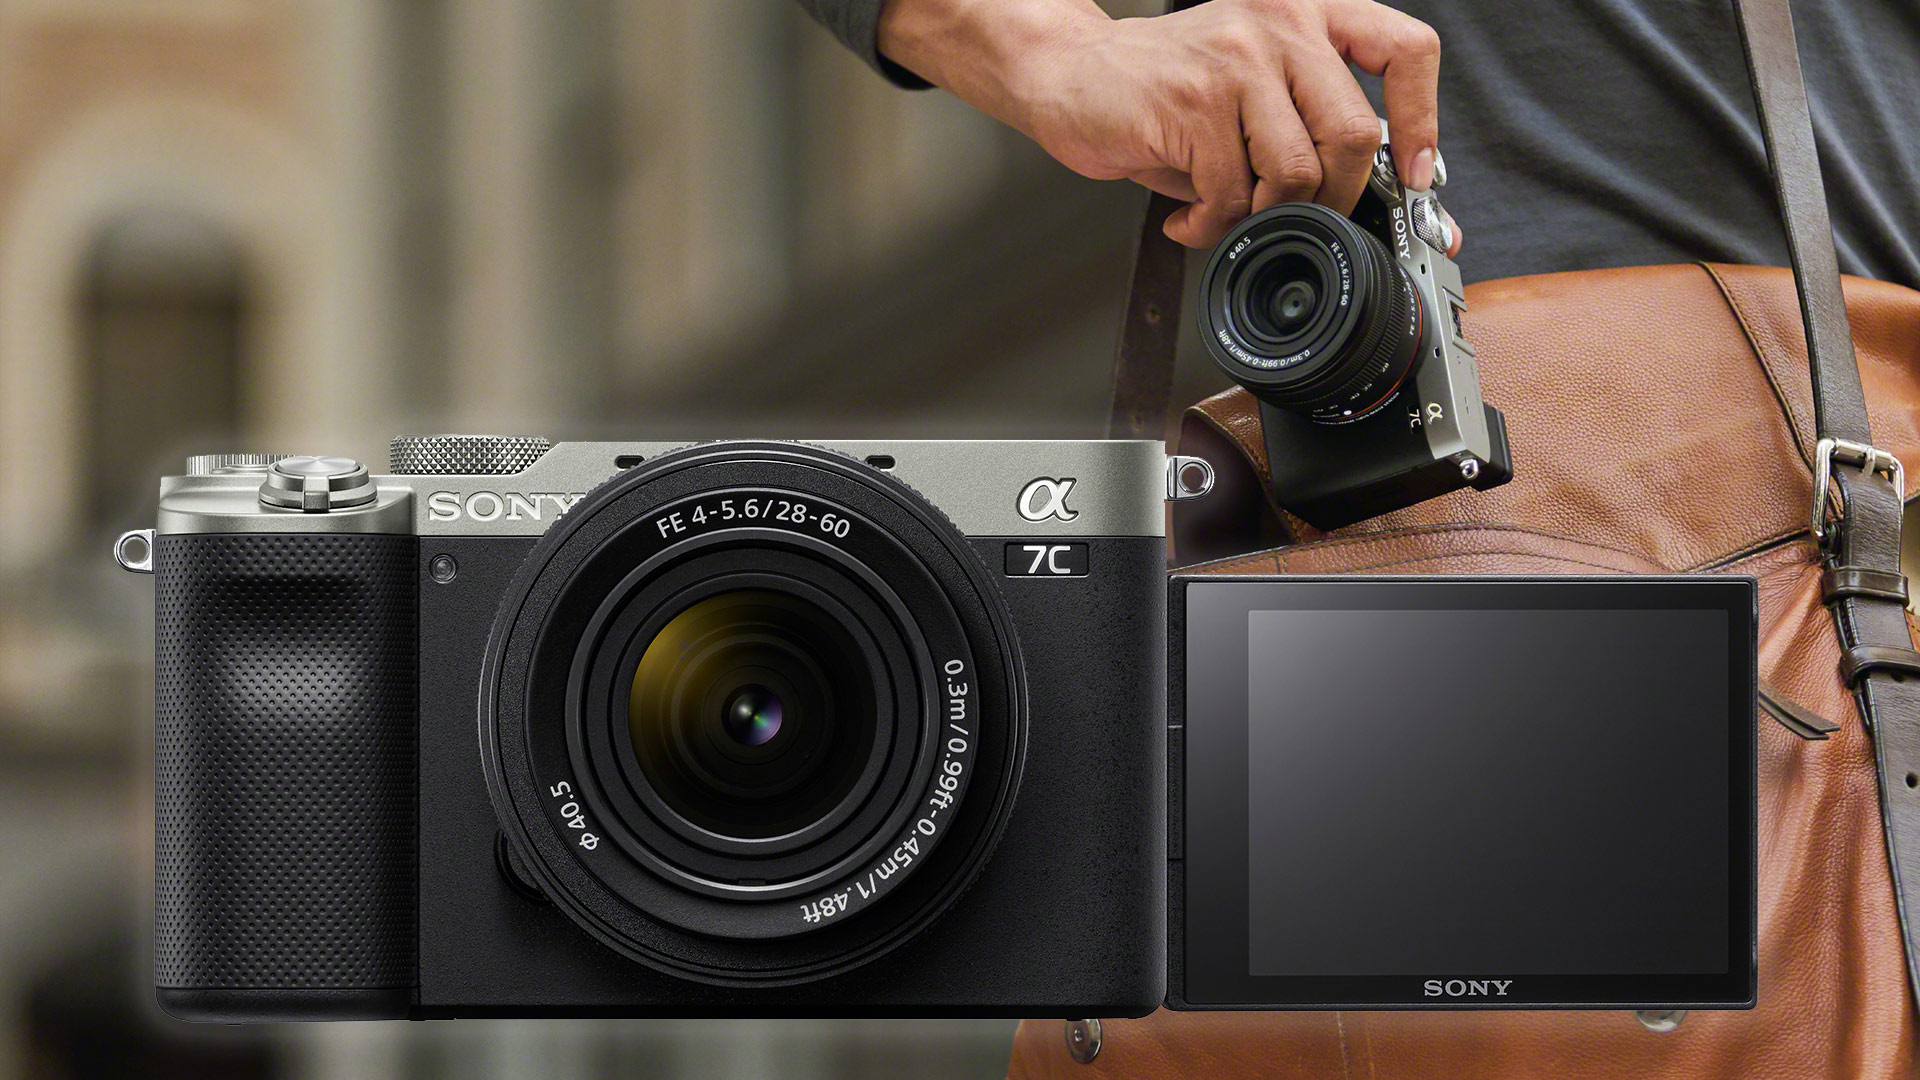 dvanaest prikaz trag  Sony a7C Announced - The Most Compact Full-Frame Mirrorless Camera | CineD